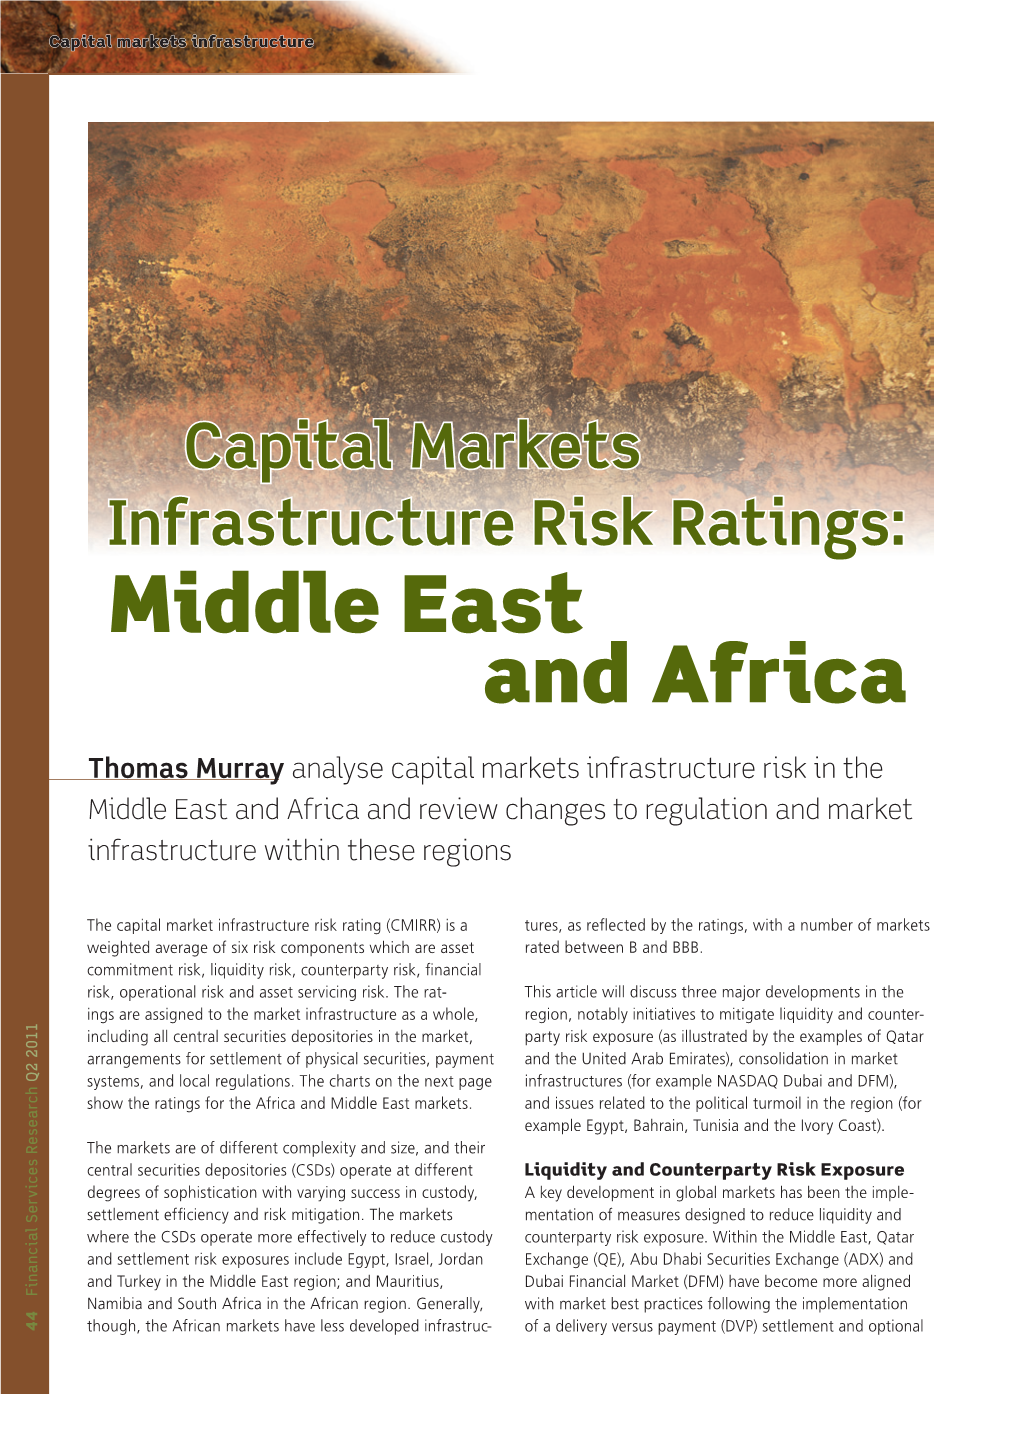 Middle East and Africa Have a Buy-In Arrangement in Place